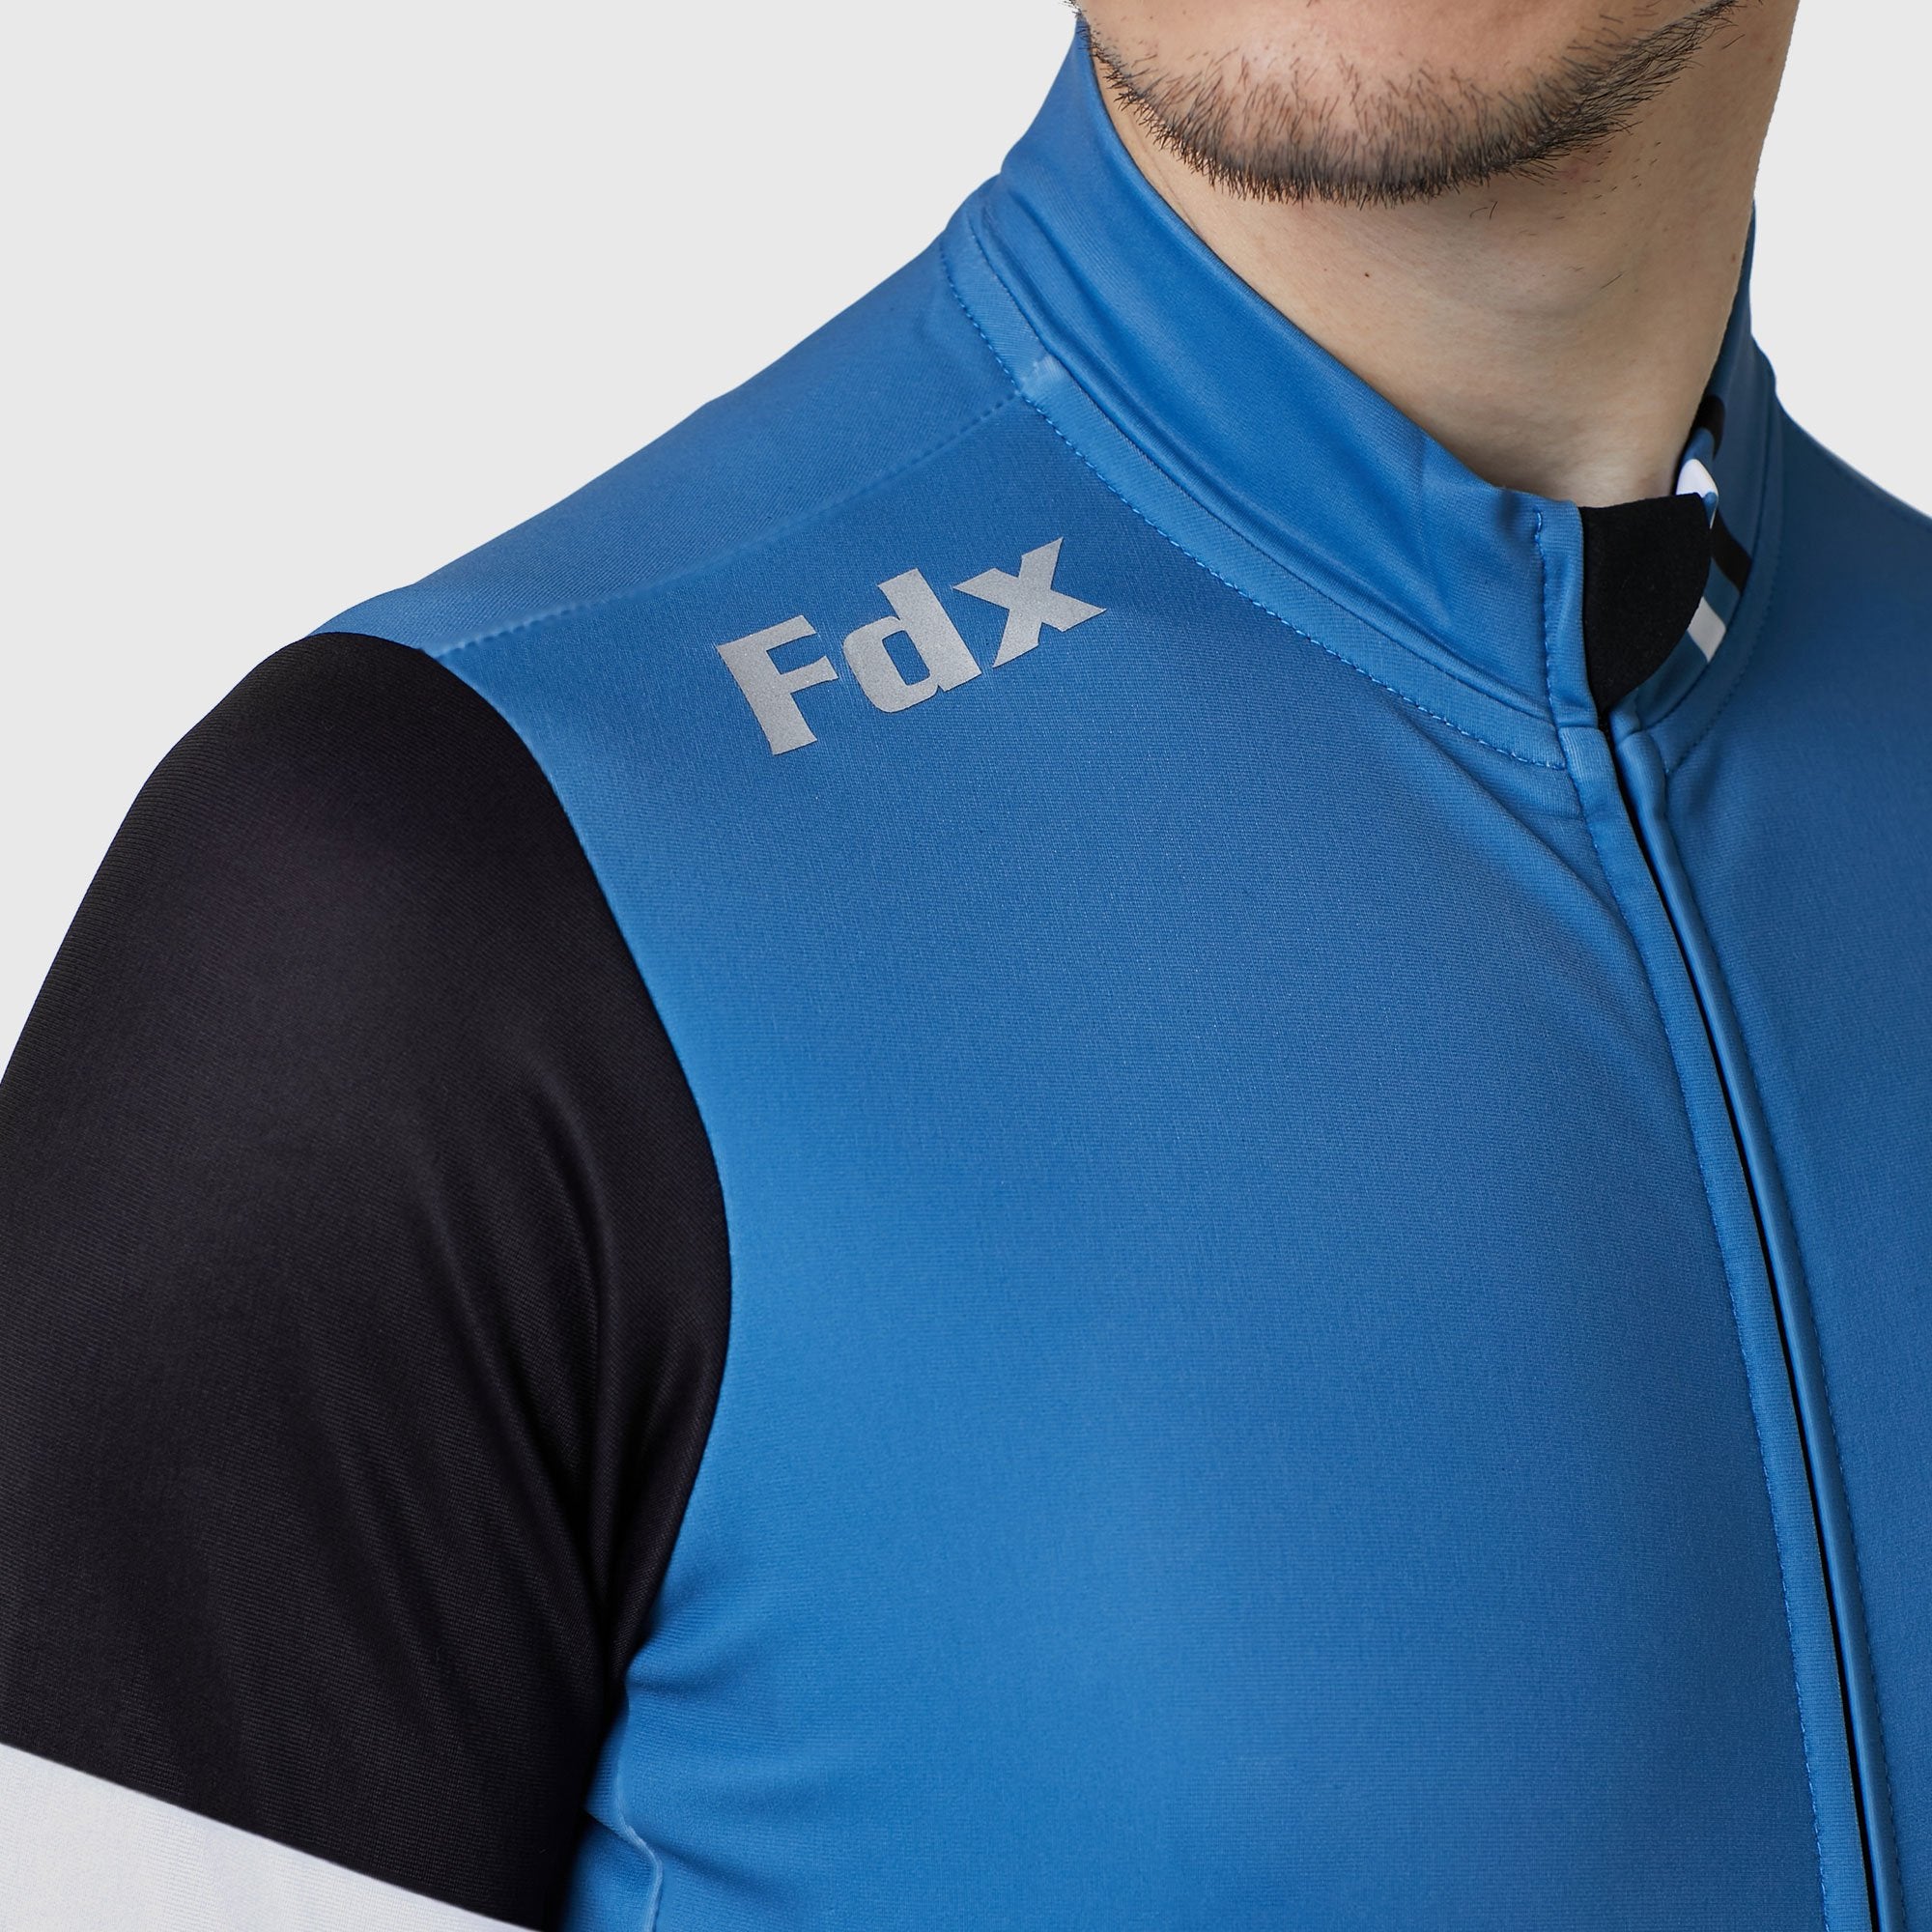 Fdx Limited Edition Jersey | Sports Cycling - Thermal Sleeve Blue Men\'s Long US Sports® FDX FDX